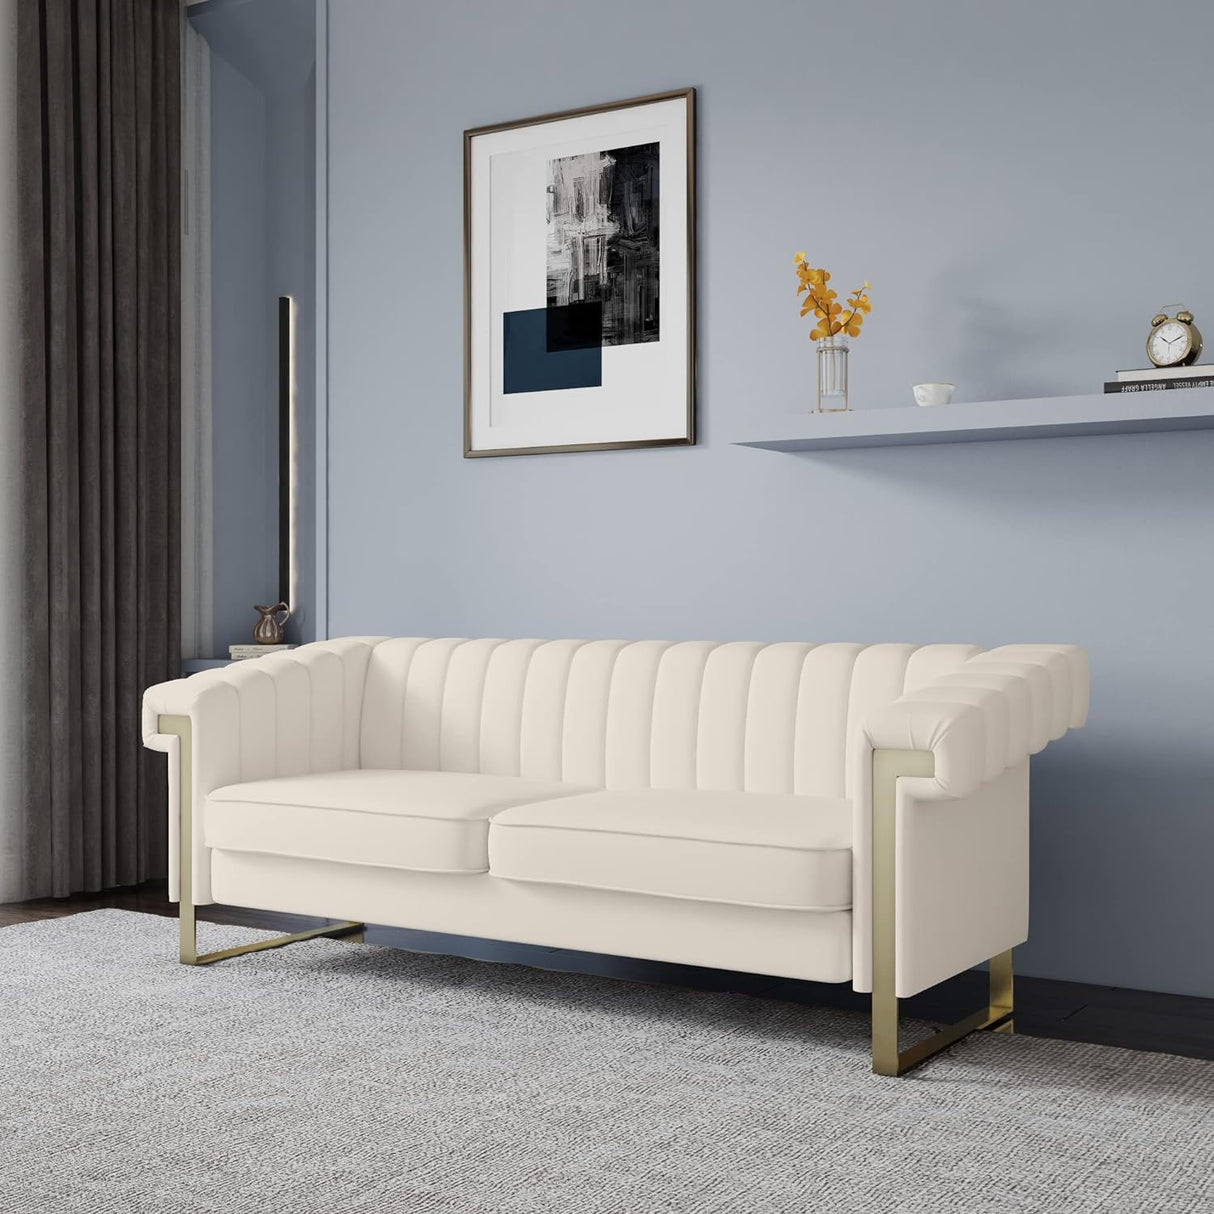 Modern Sofa,Collection Contemporary Velvet Upholstered Sofa Couch with Stainless Steel Base,83.86“ Lx 30.70“ Wx 30.51“ H(Beige)